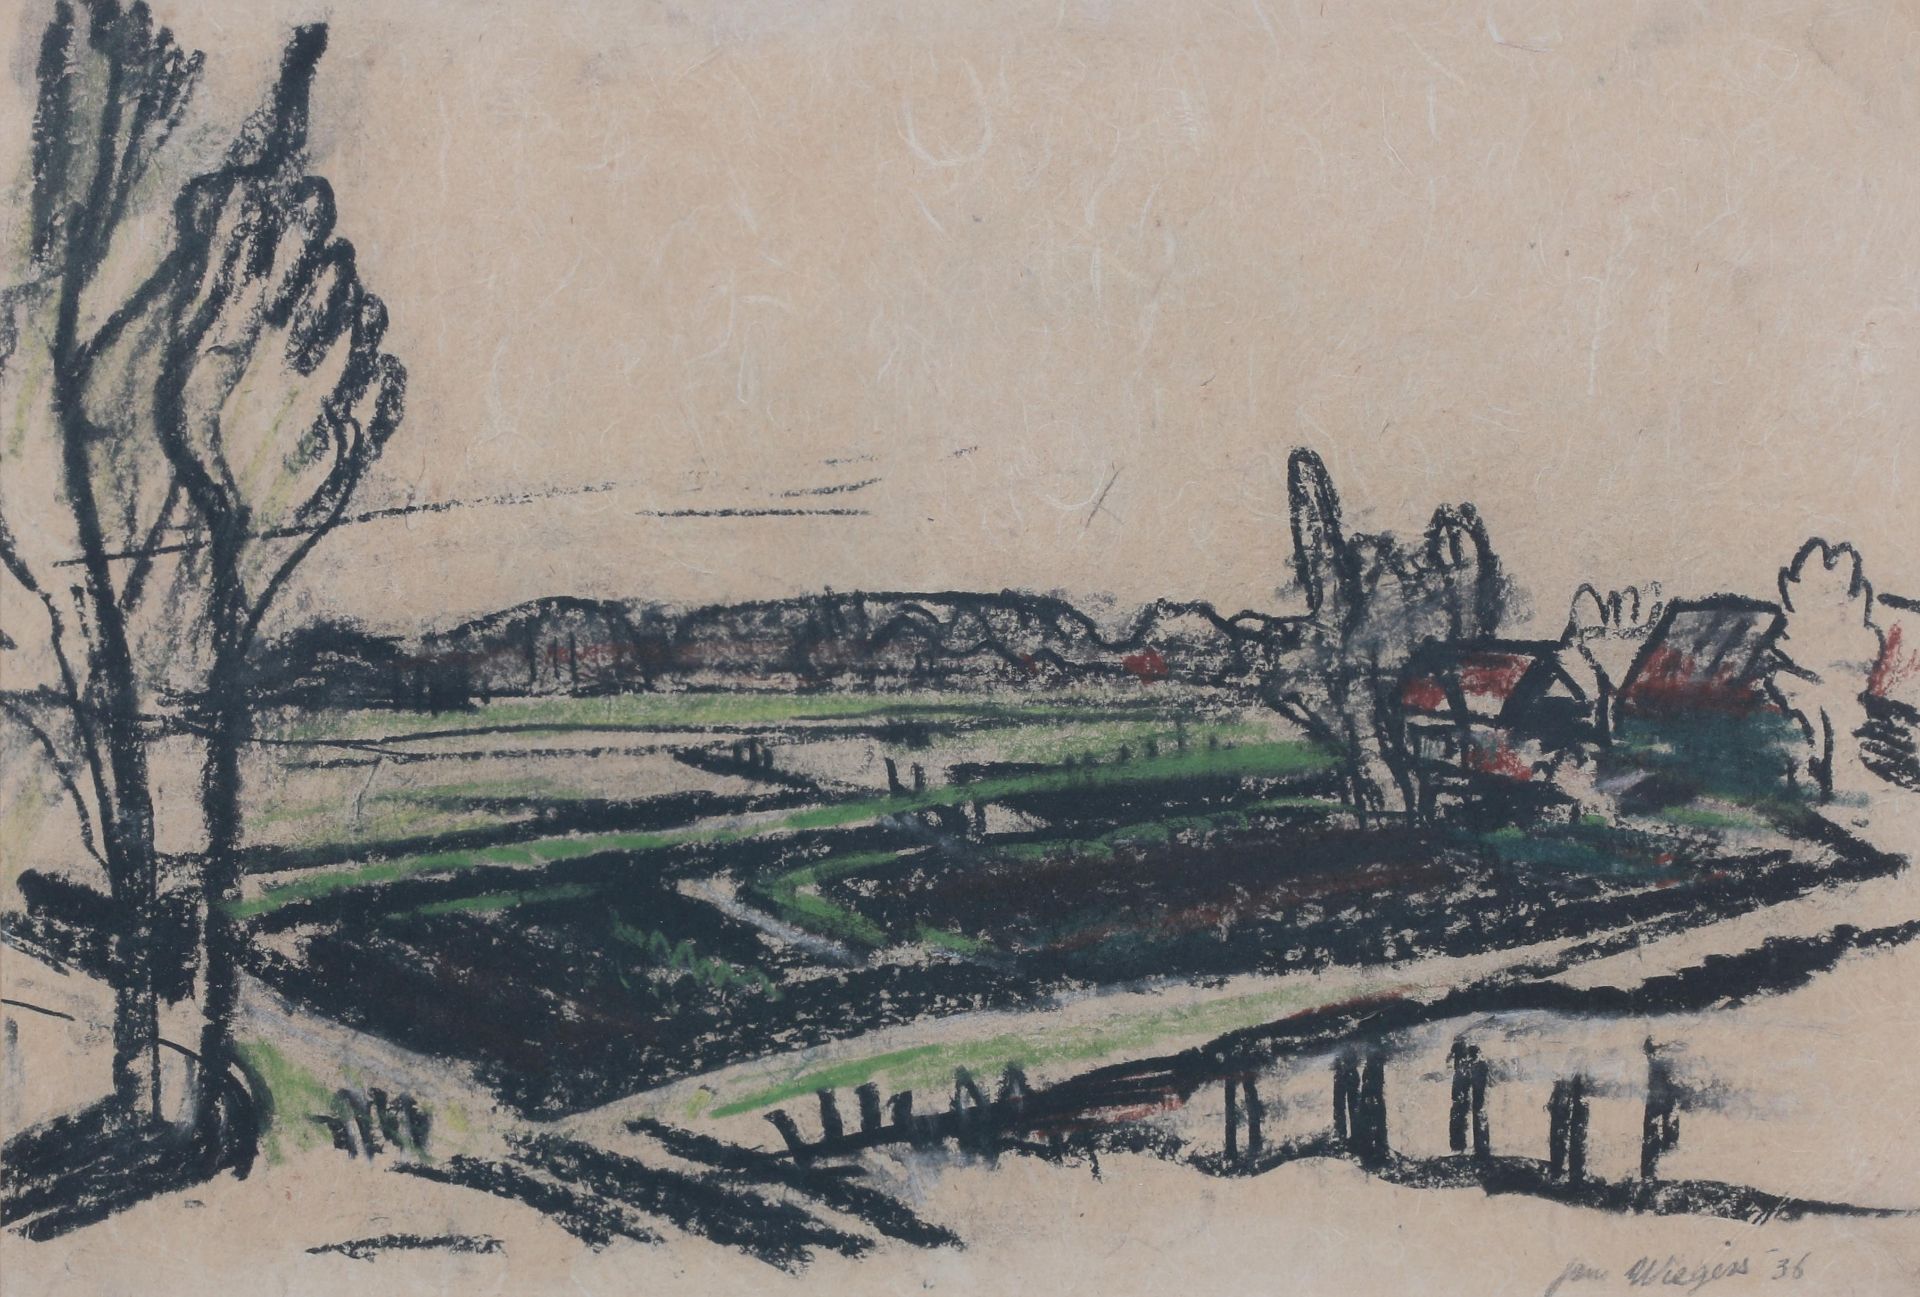 Jan Wiegers (1893-1959) Landscape. Signed and dated 1936 lower right. Gemengde techniek